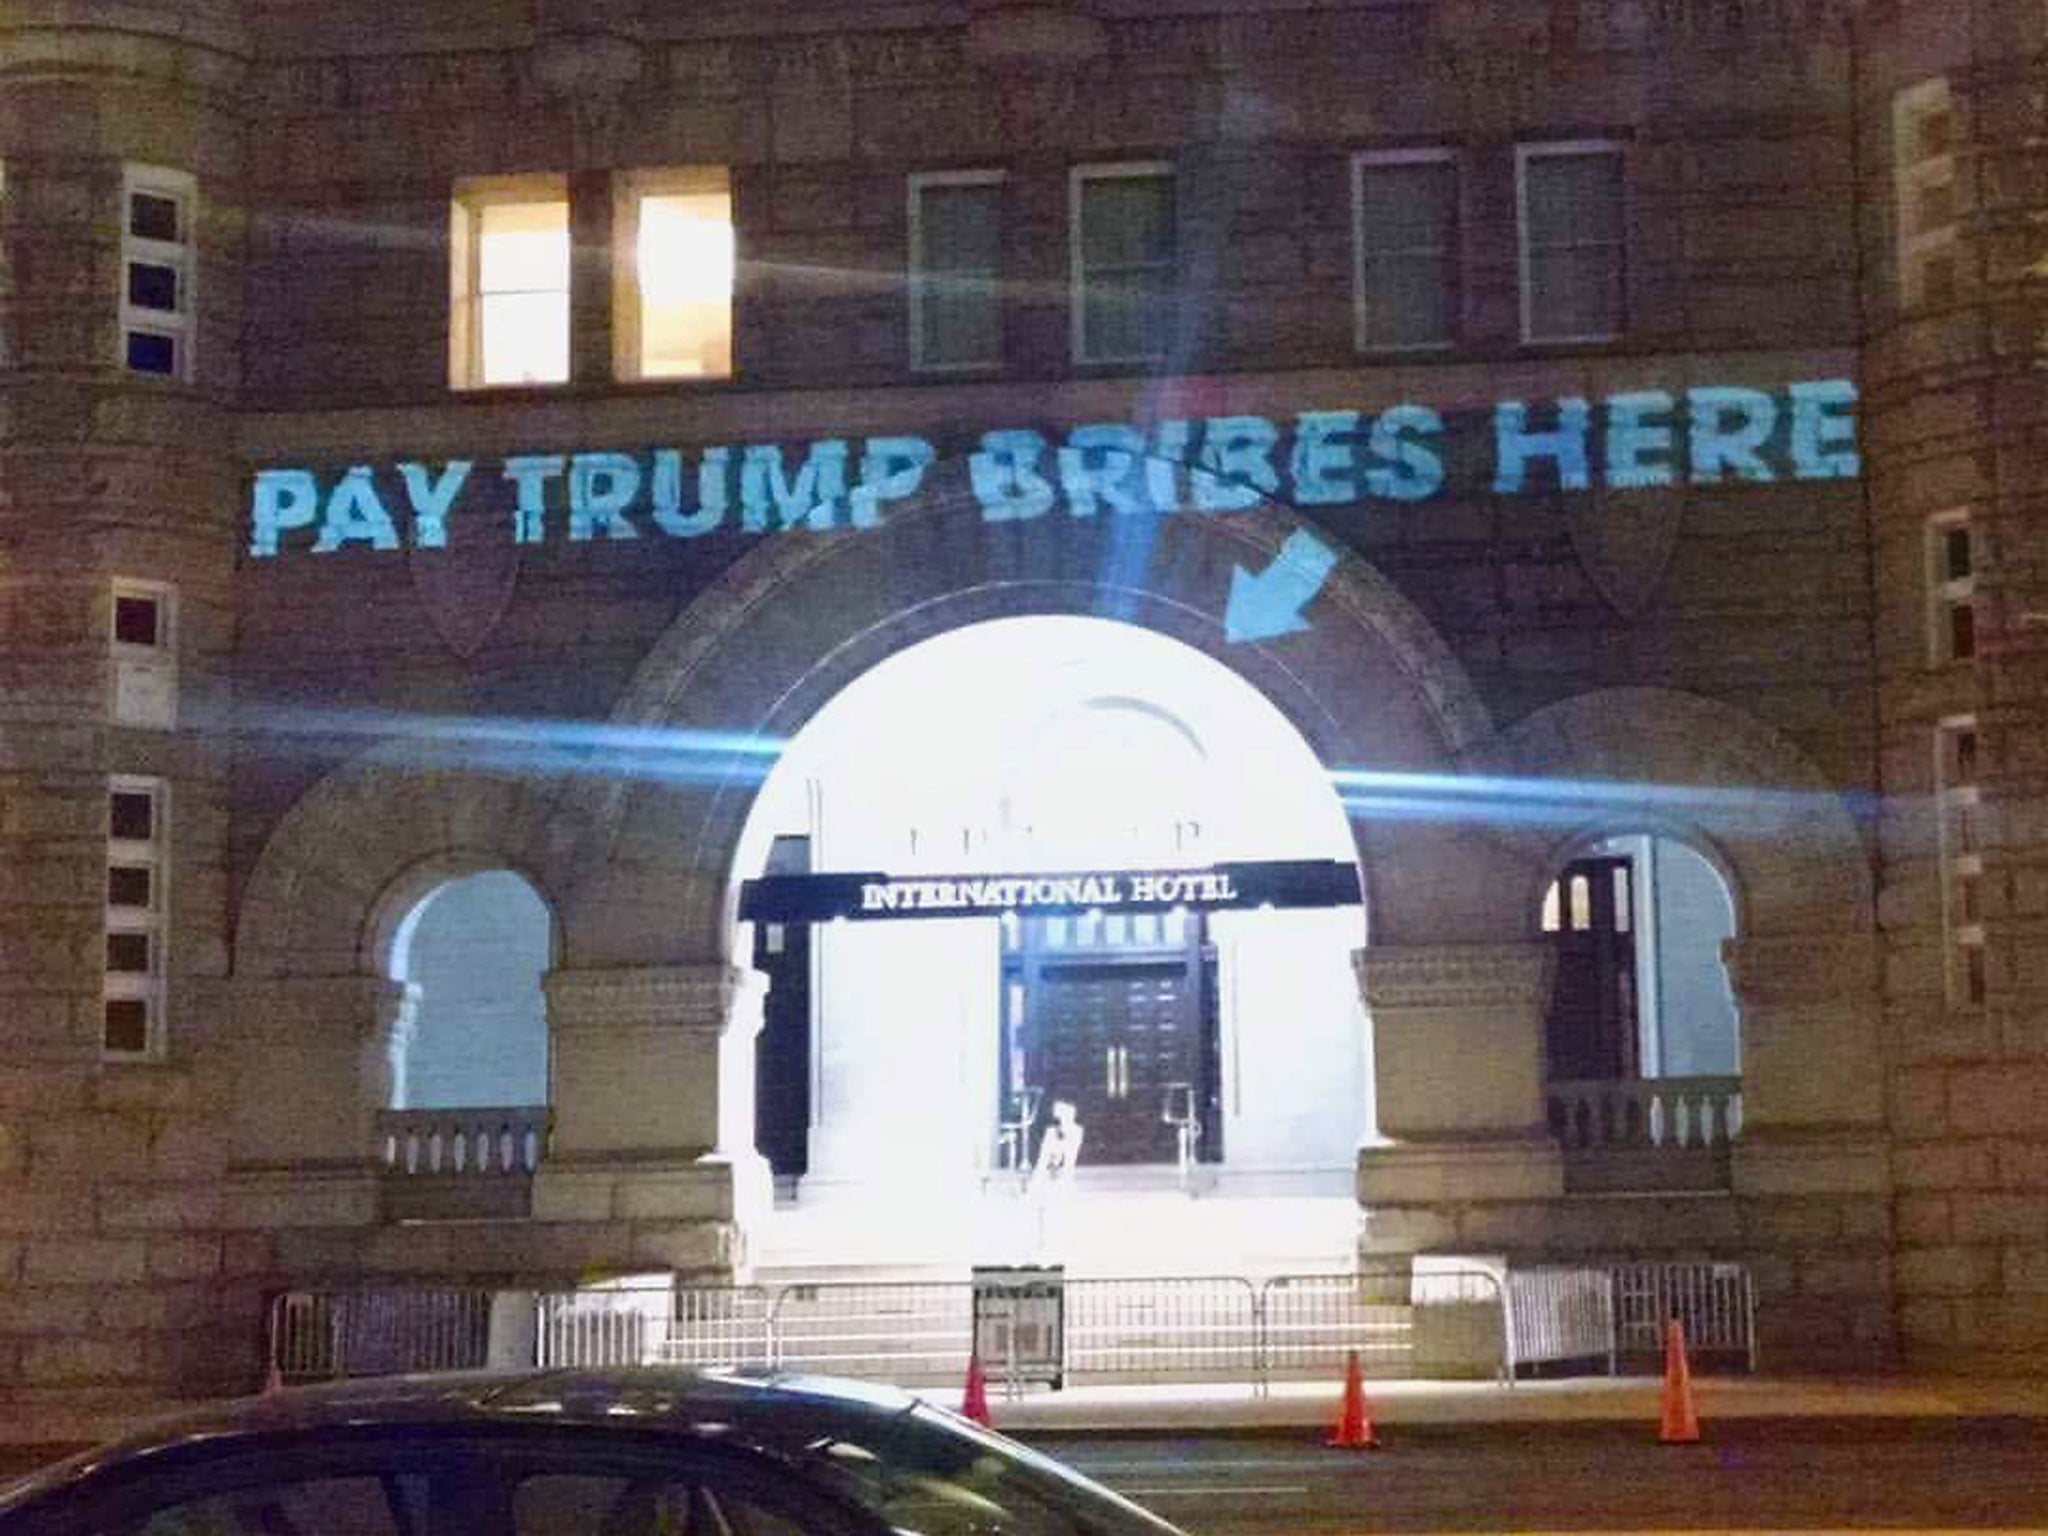 People shared photos of the light projections and commended the artist for his apparent act of protest